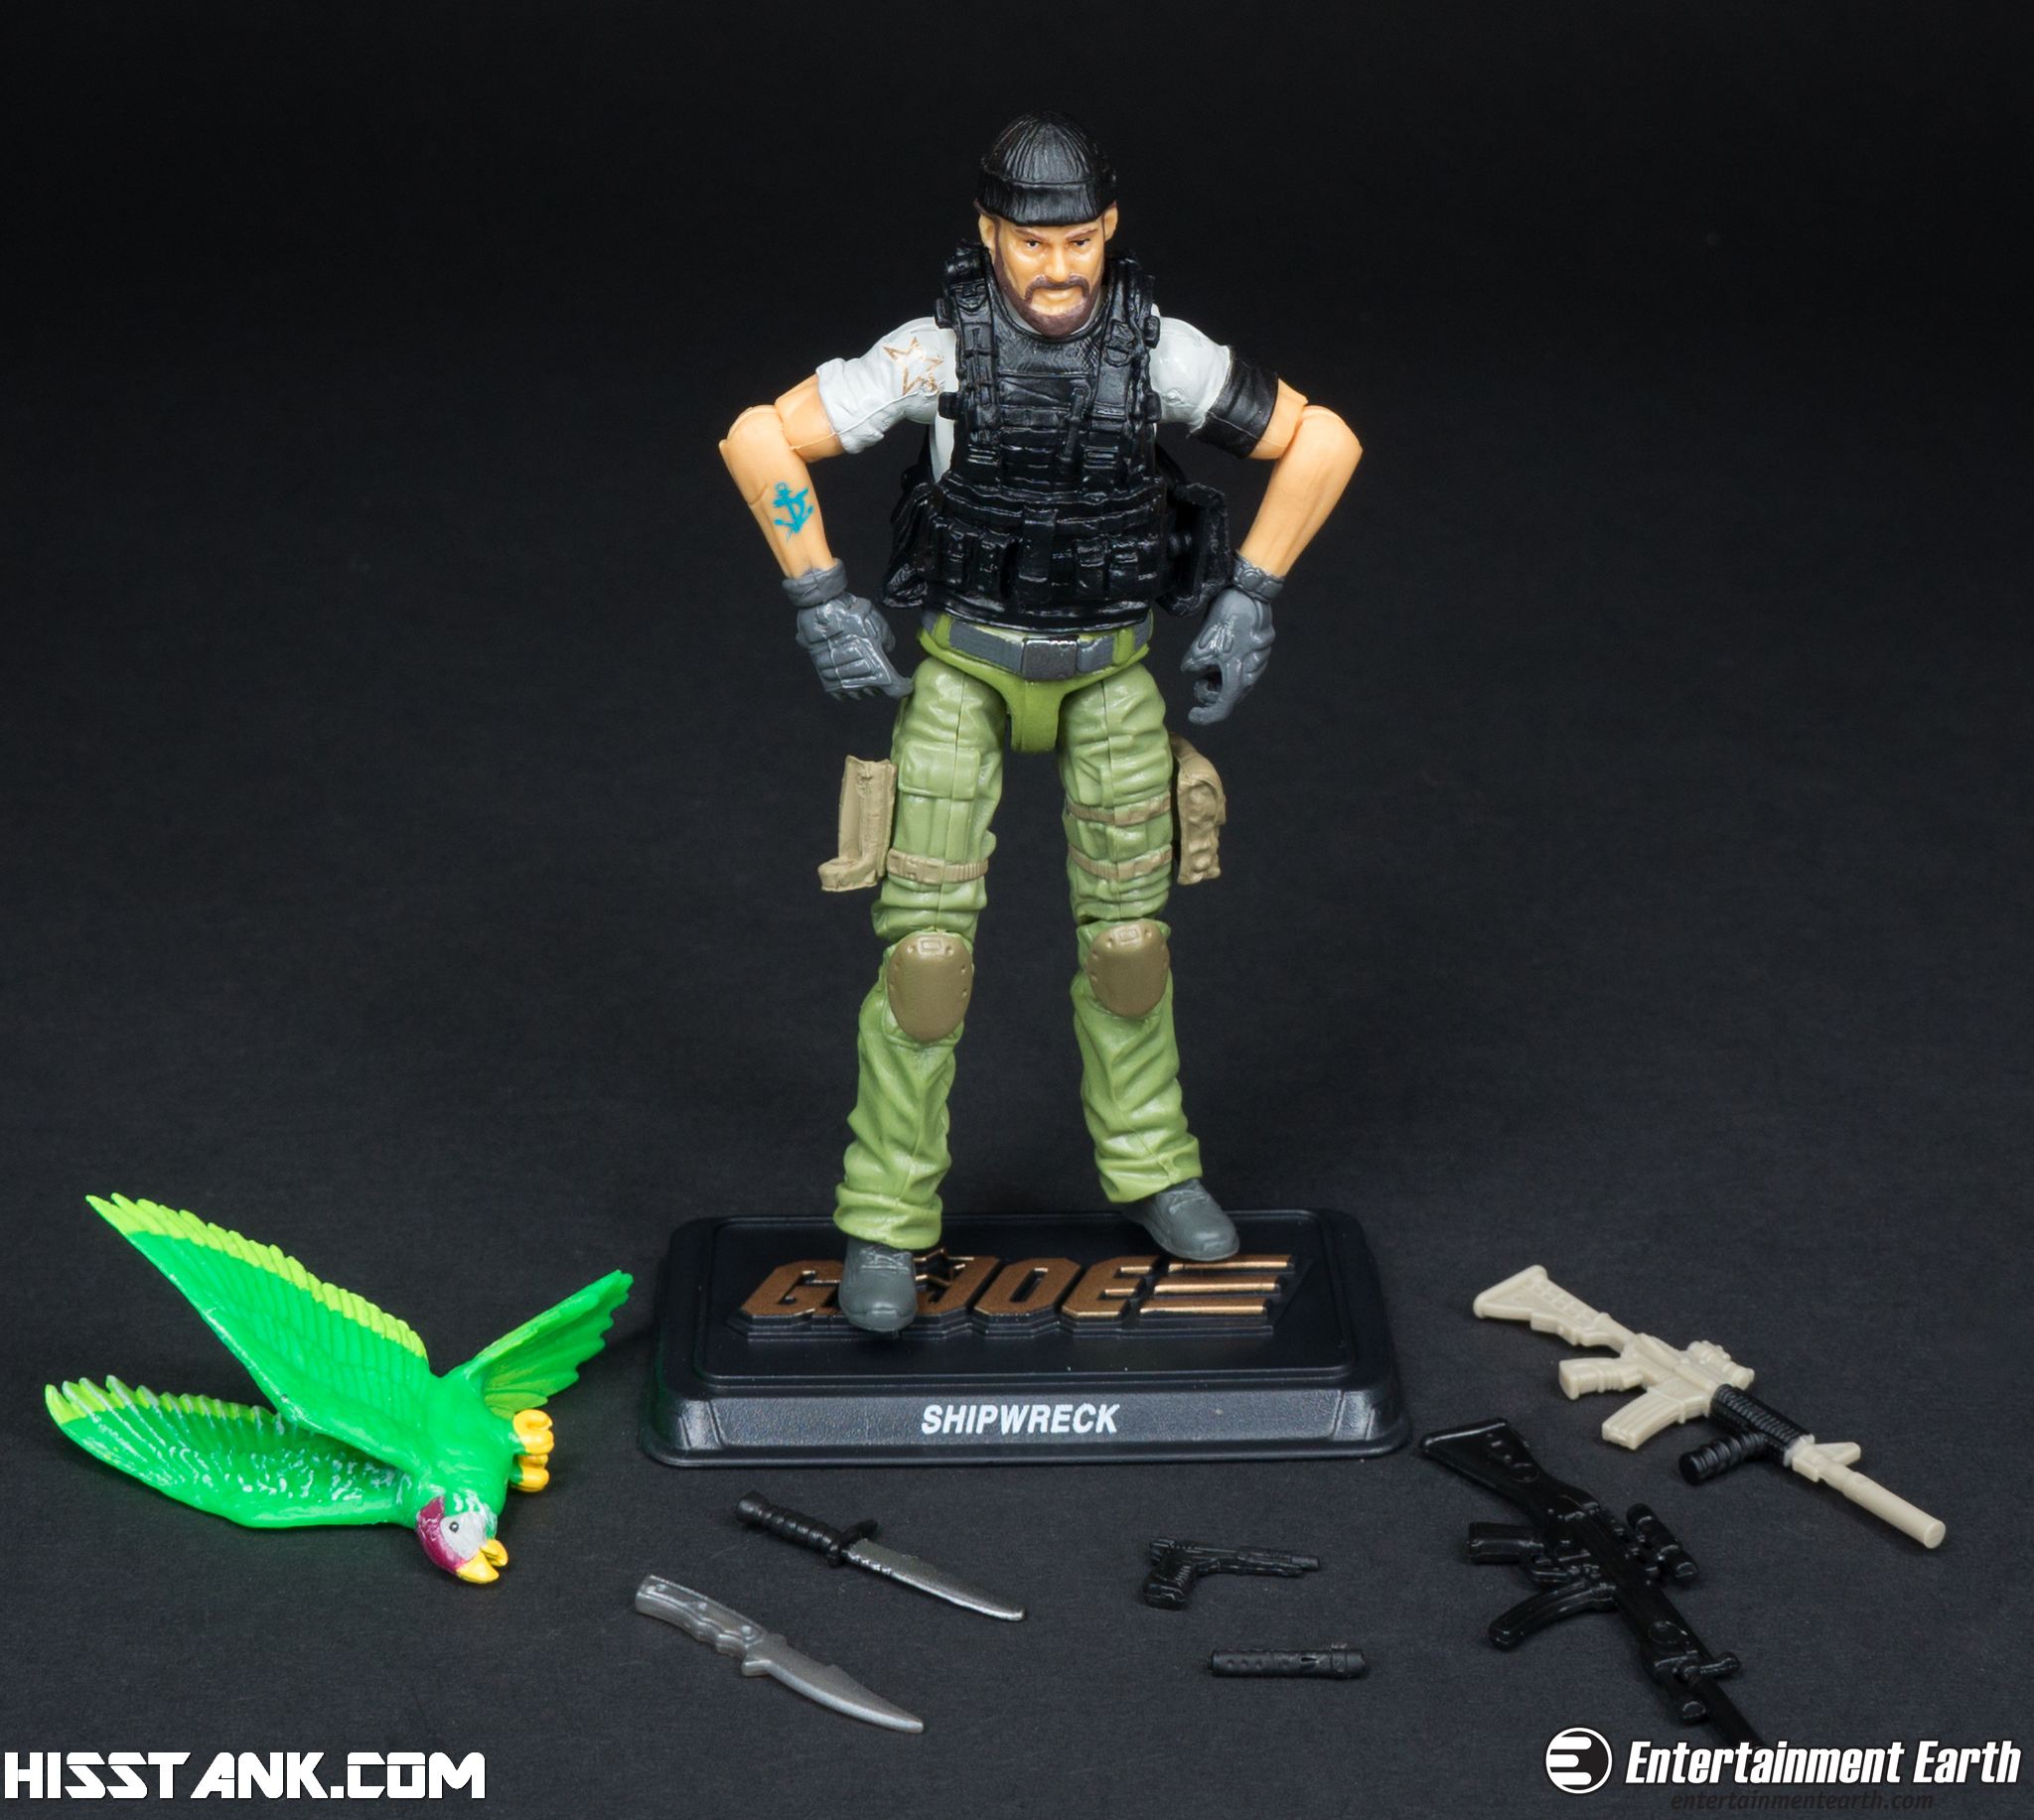 Details about   GI Joe 50th SHIPWRECK Display Stand 